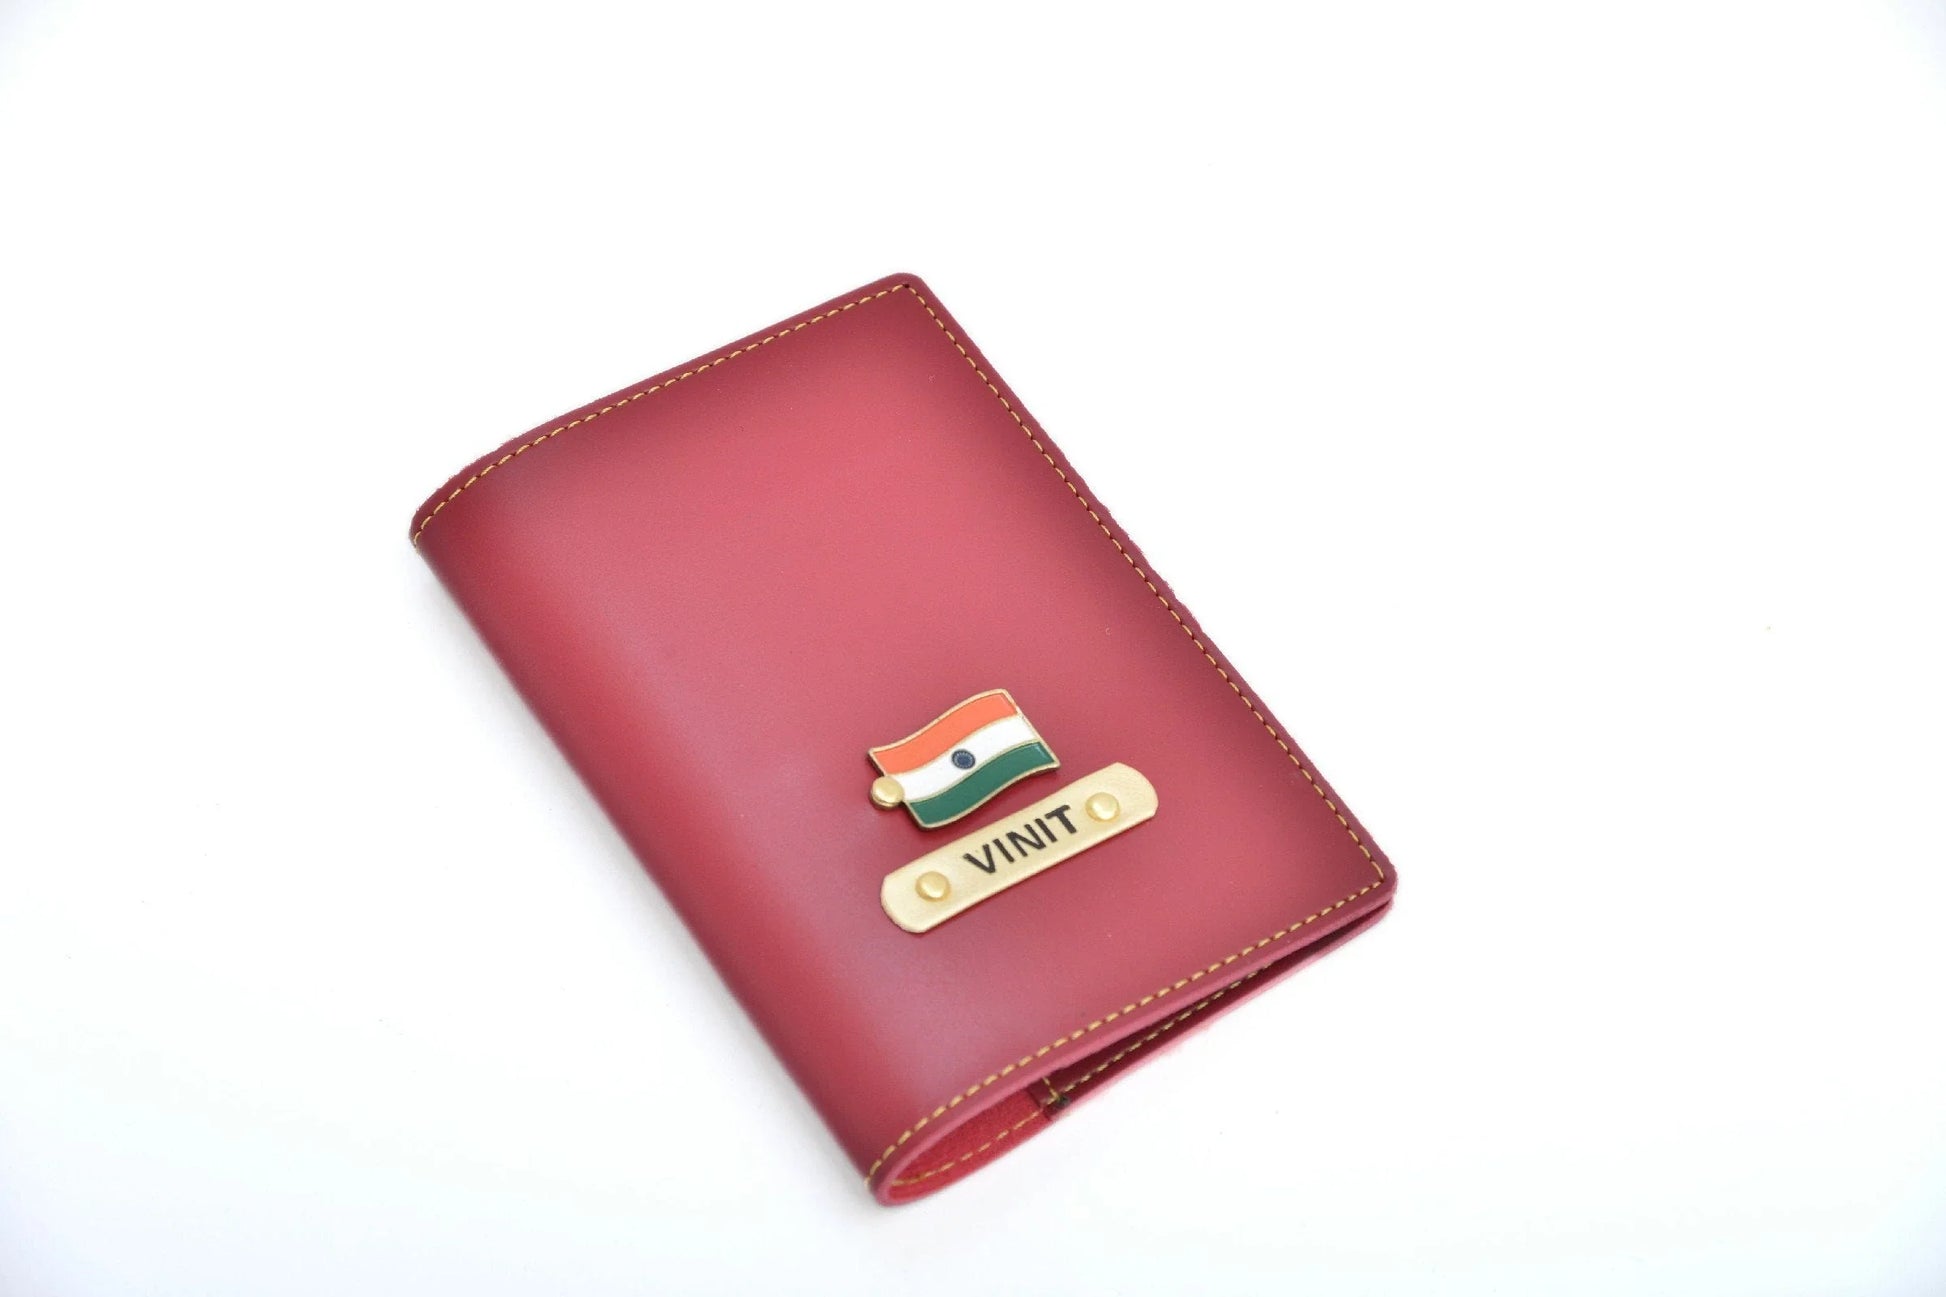 personalized-cb08-wine-customized-best-gift-for-boyfriend-girlfriend.A must-have travel accessory for today's minimalist traveler who seeks both style and function. With a personalized touch, it has your name and charm on it with its attractive finish.The case with its sturdy build ensures protection of your passport during traveling shenanigans! It carries your passport, money, cards etc. at one place. Material-vegan/synthetic leather